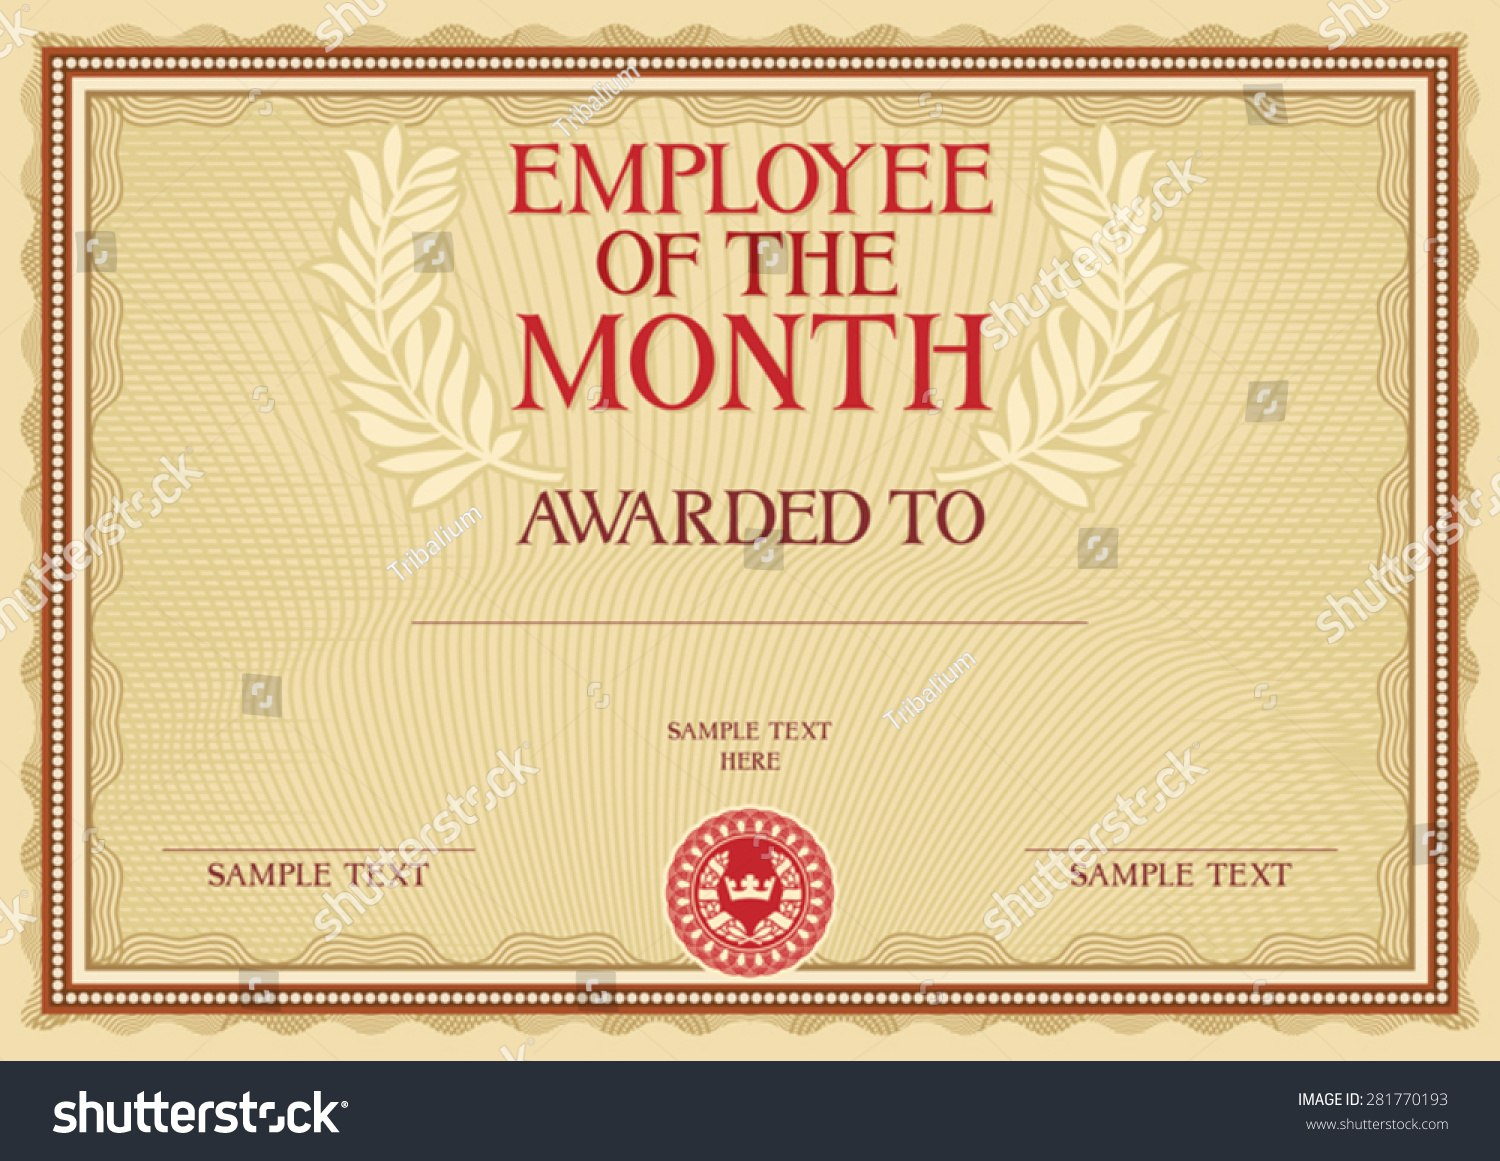 Employee Month Certificate Template Stock Vector Royalty Free pertaining to Manager Of The Month Certificate Template